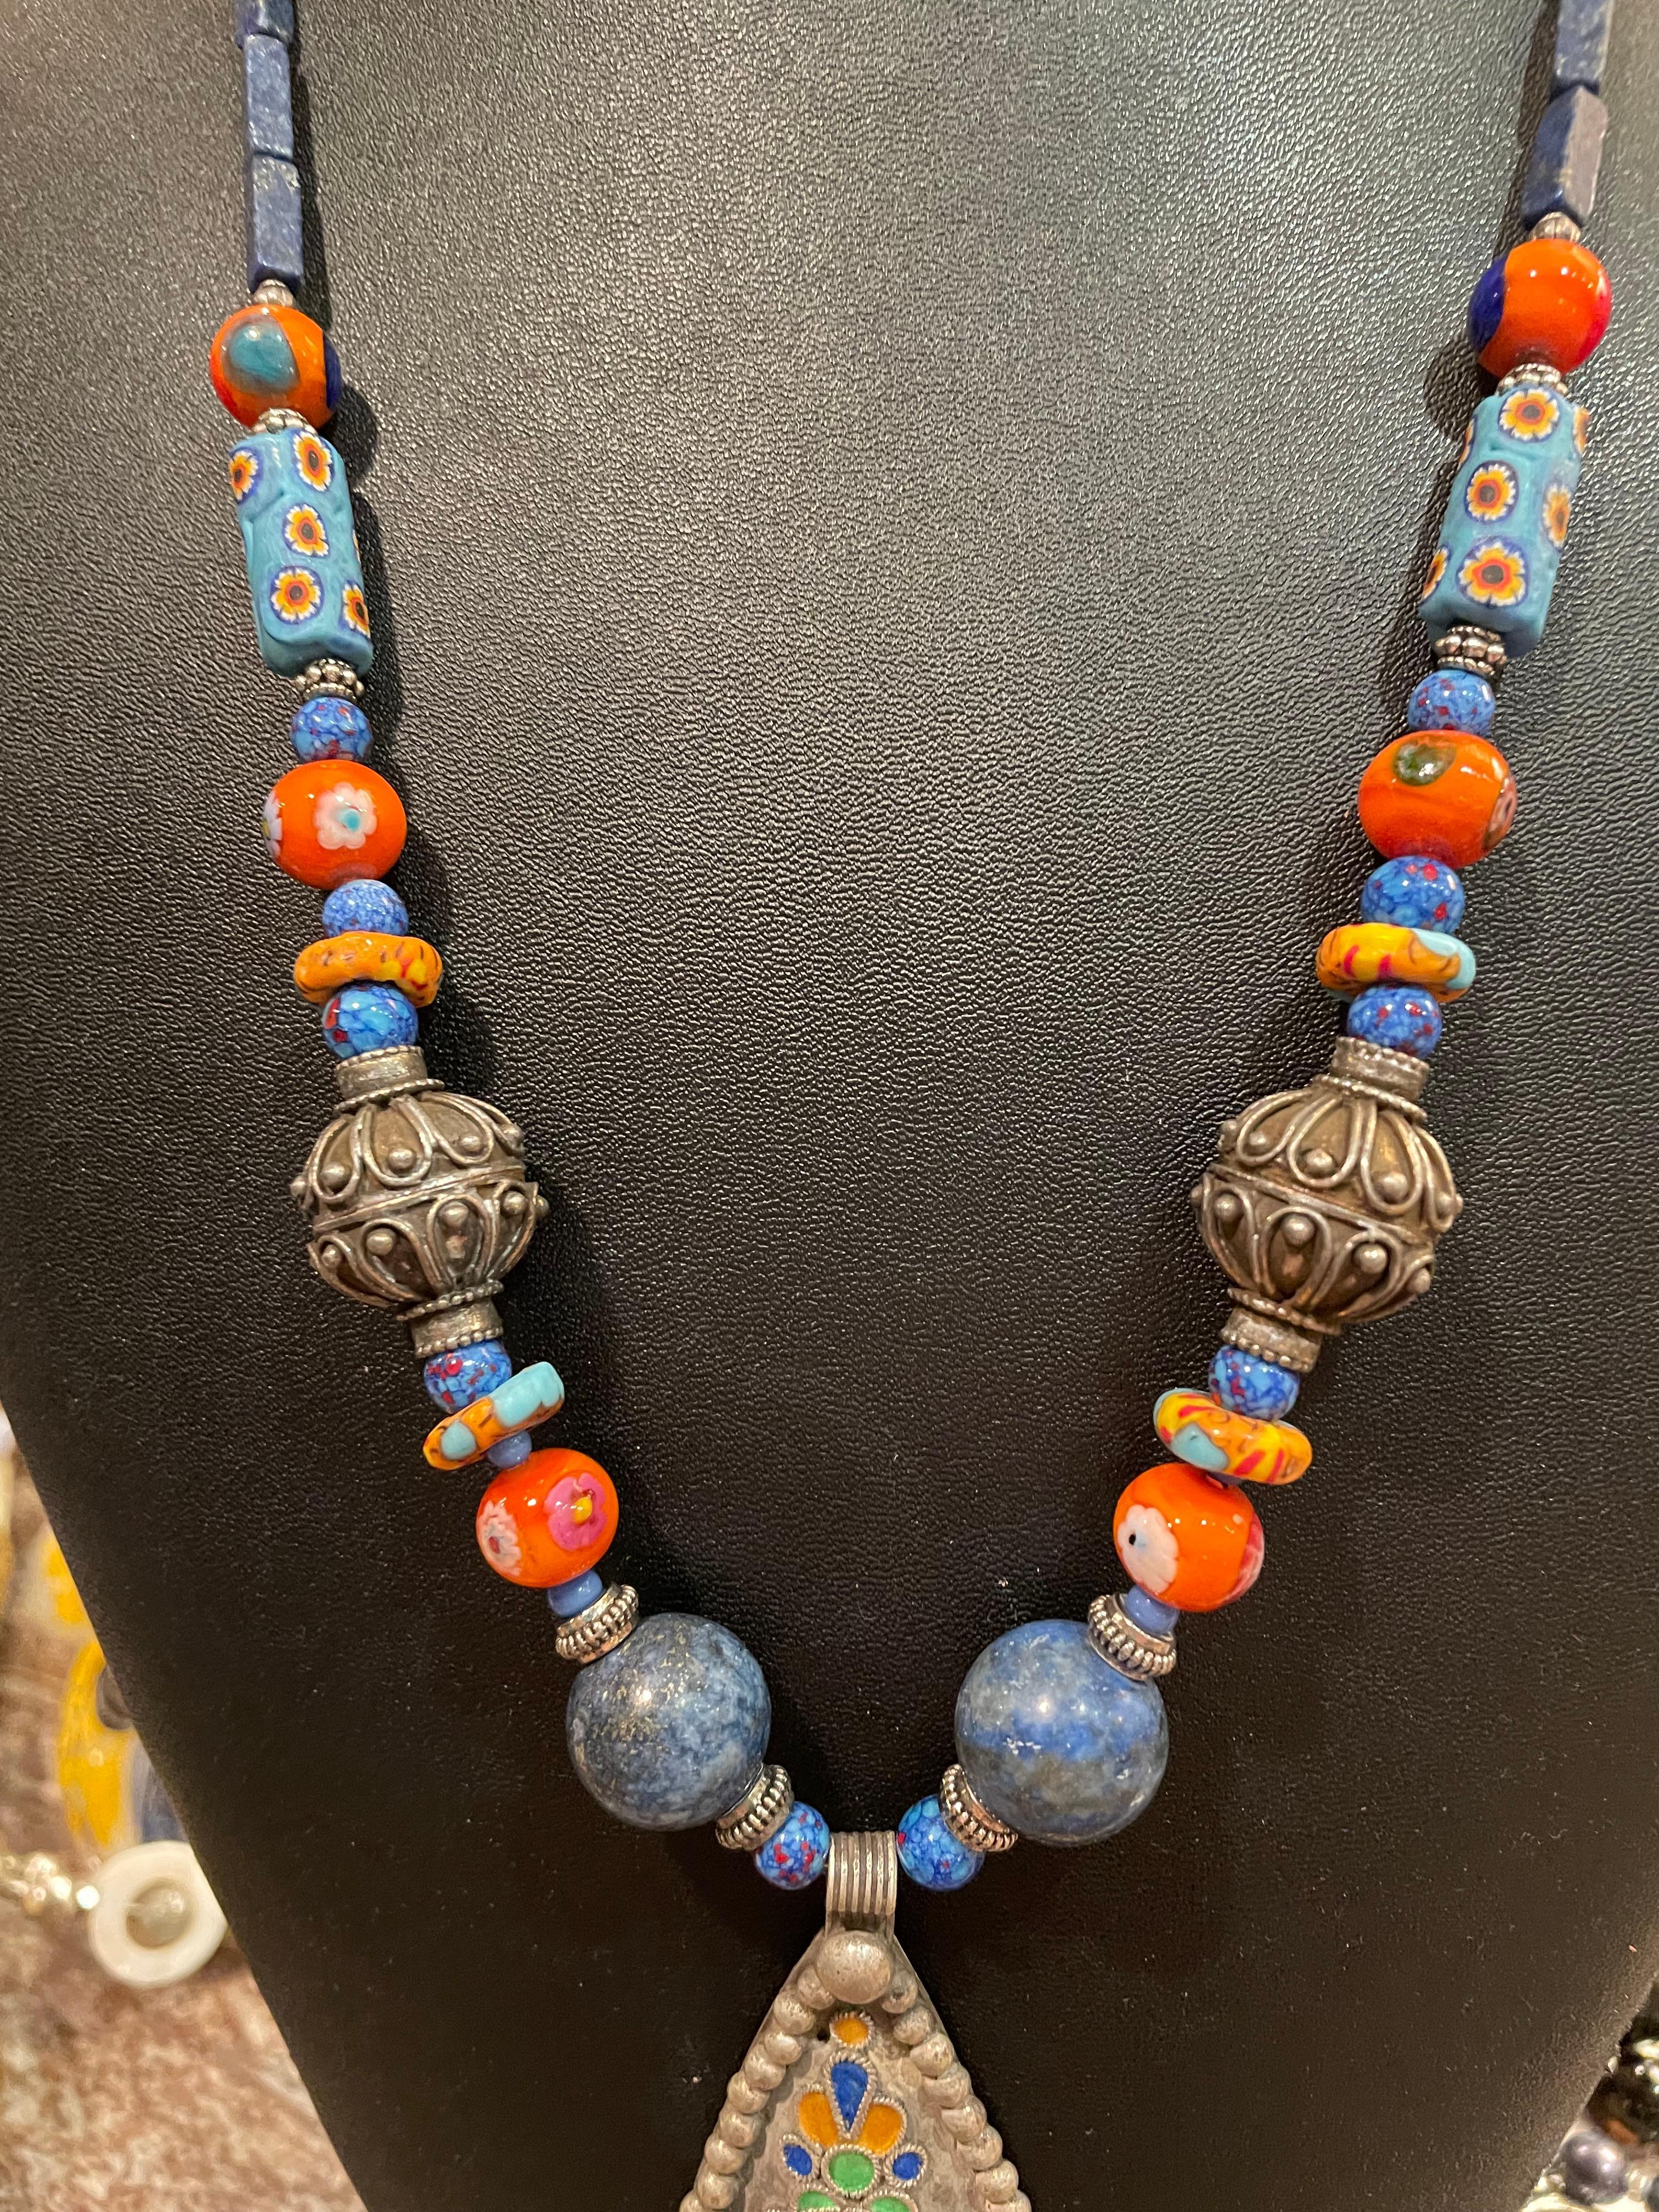 Artisan LB offers an antique Moroccan, enamel pendant with lapis /silver beads necklace For Sale